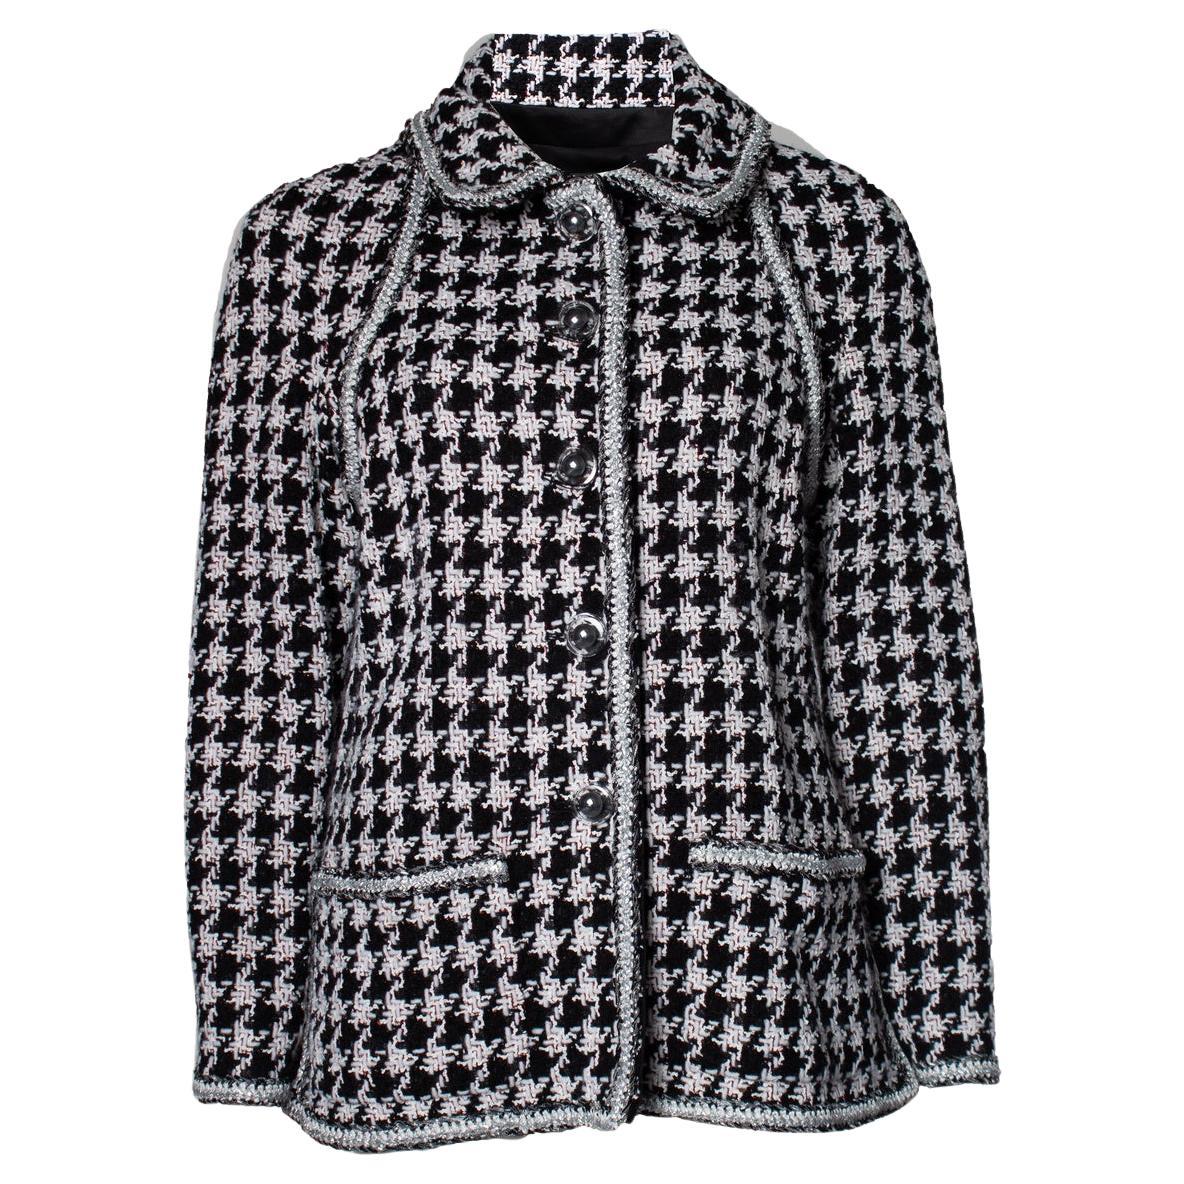 Chanel, Black and white houndstooth jacket For Sale